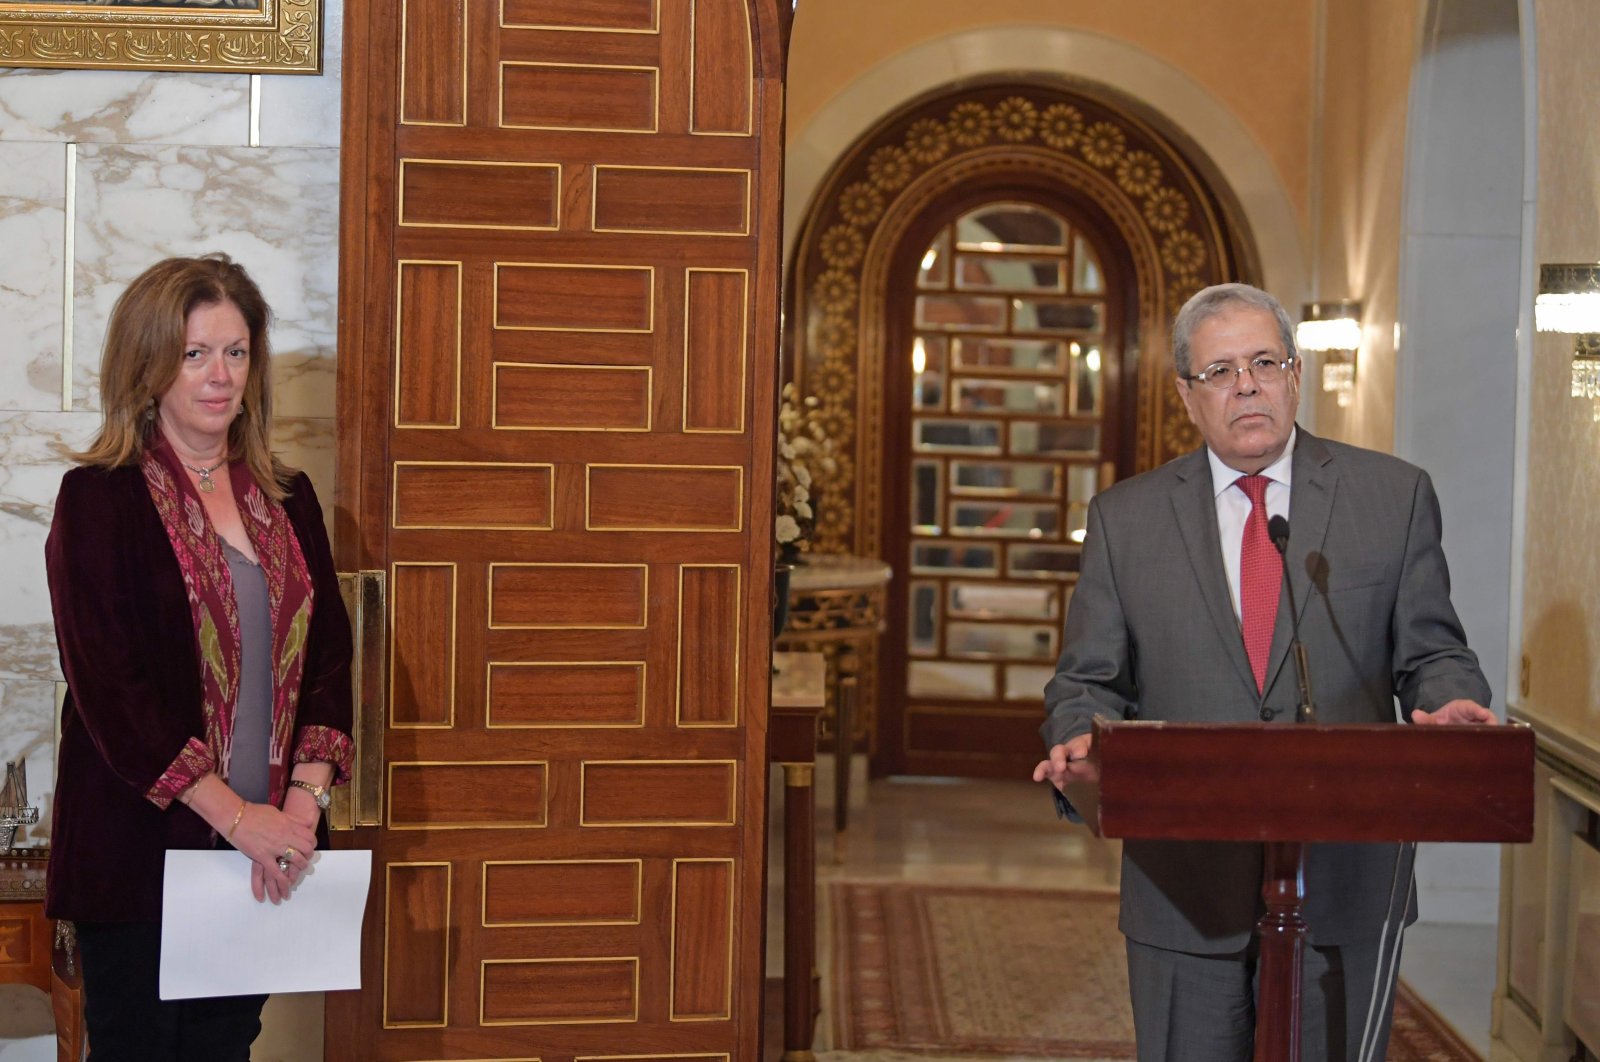 Tunisia's Foreign Minister Othman Jerandi (R) and Stephanie Williams, the deputy special representative of the UN Secretary-General for Political Affairs in Libya, hold a press conference at Carthage Palace on the eastern outskirts Tunis on October 12, 2020. (AFP Photo)